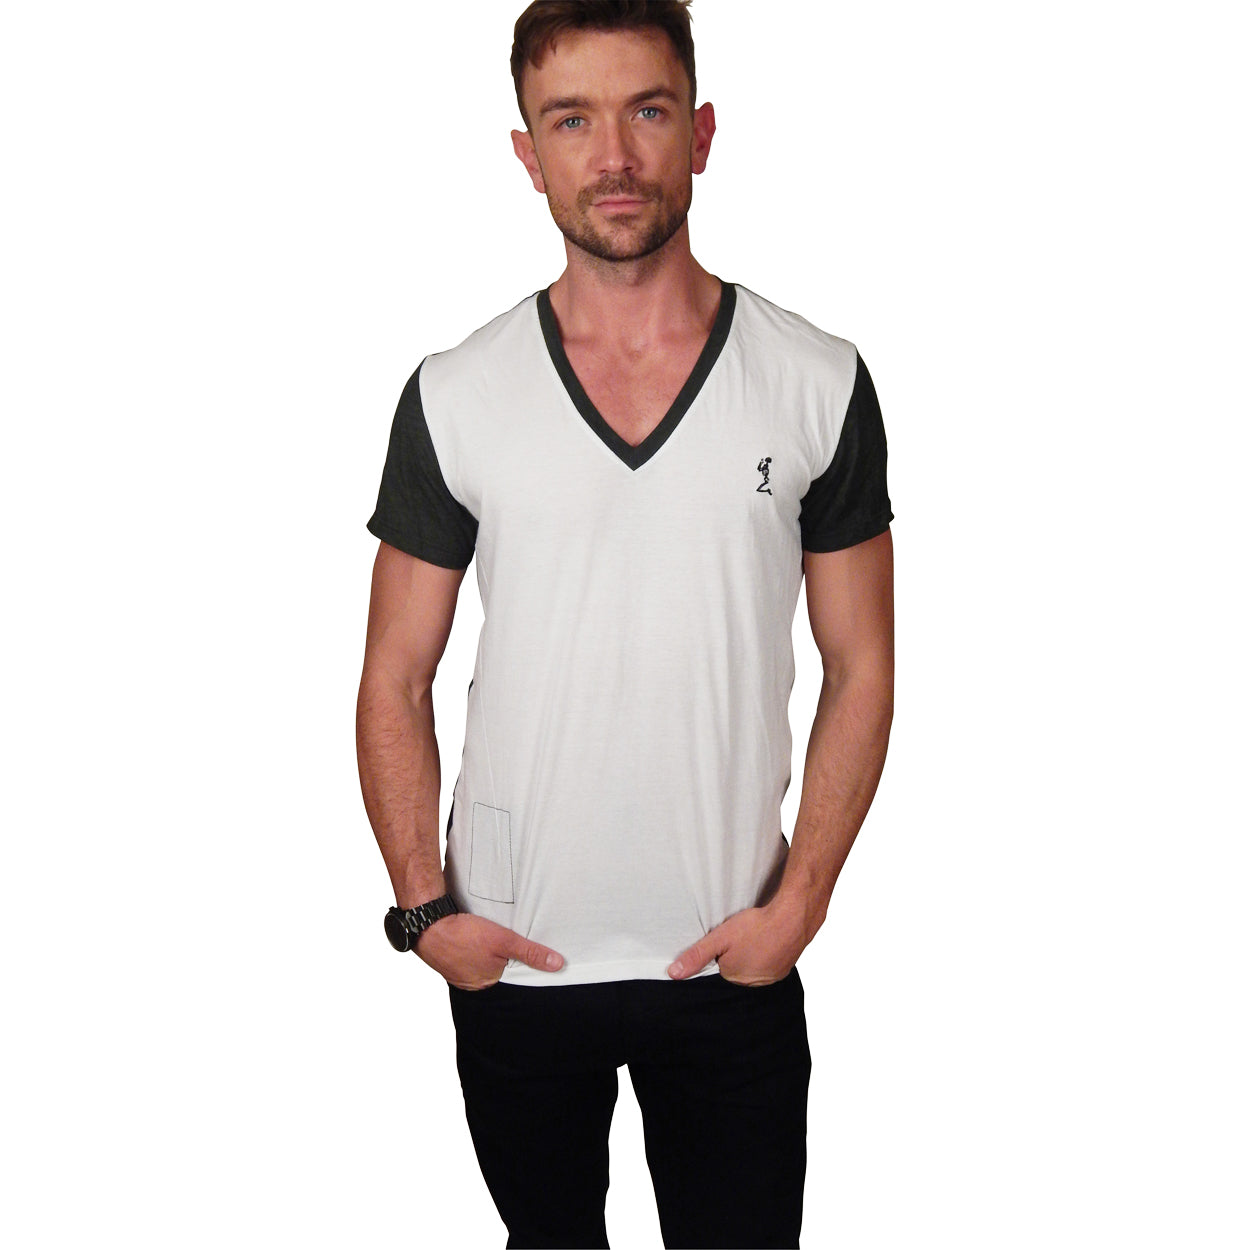 RELIGION - &quot;BRIXTON&quot; SS V-Neck T-Shirt in Black and White